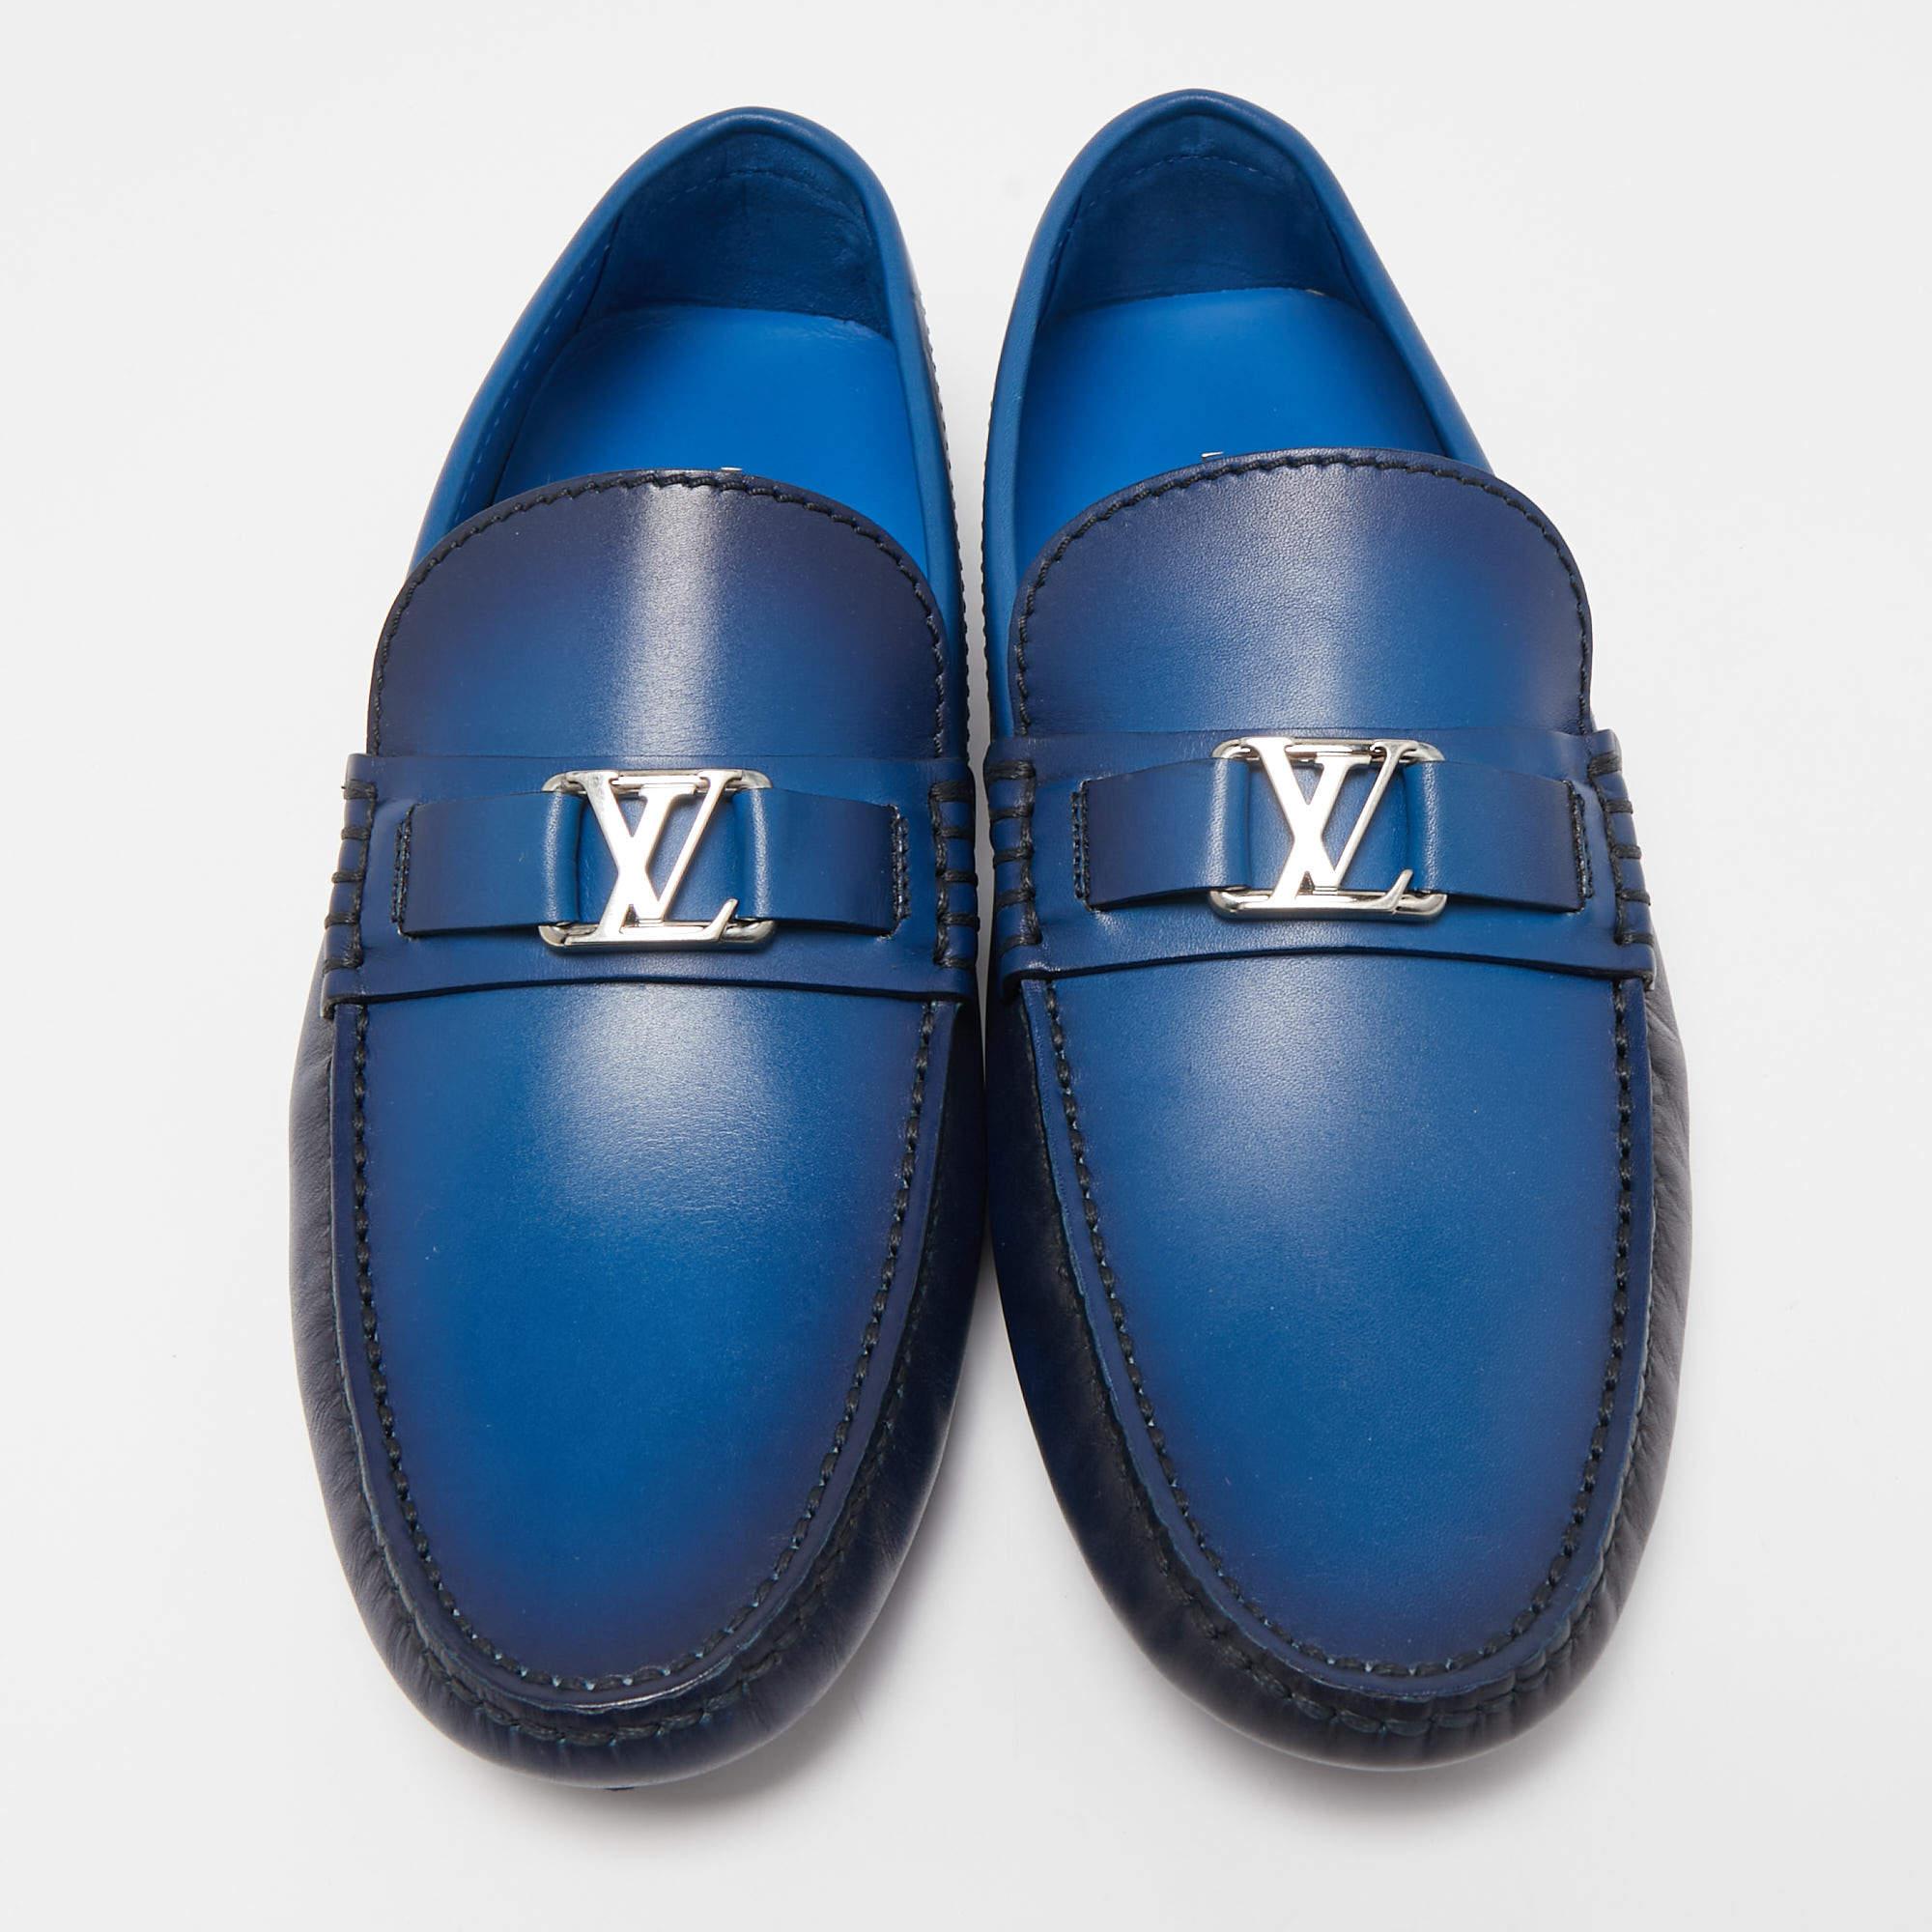 Loafers like these ones from Louis Vuitton are worth every penny because they epitomize both comfort and style. Crafted from ombre blue leather, they carry neat stitch detailing and the signature LV on the uppers. Complete with leather insoles, this